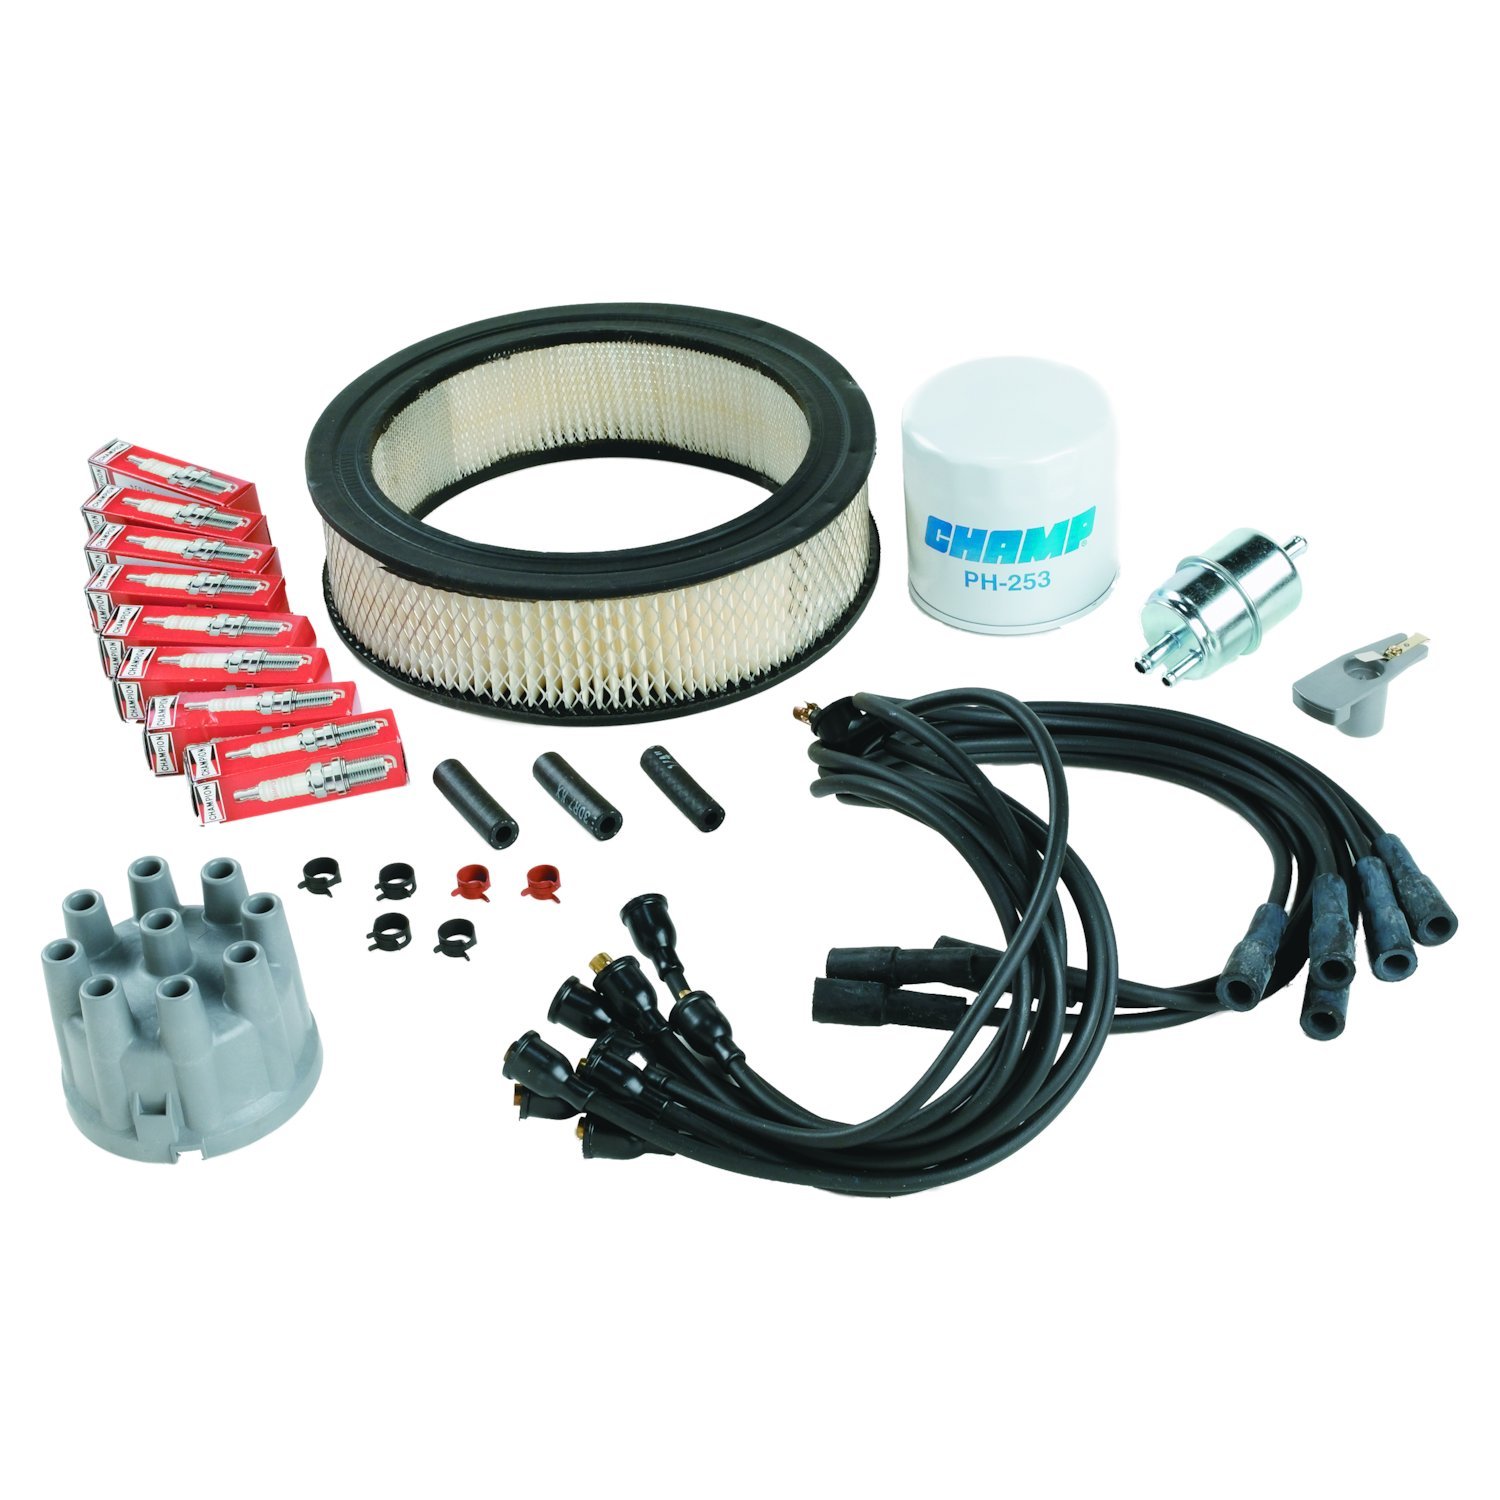 Tune Up Kit for 1991 Jeep SJ w/ 5.9L Engine